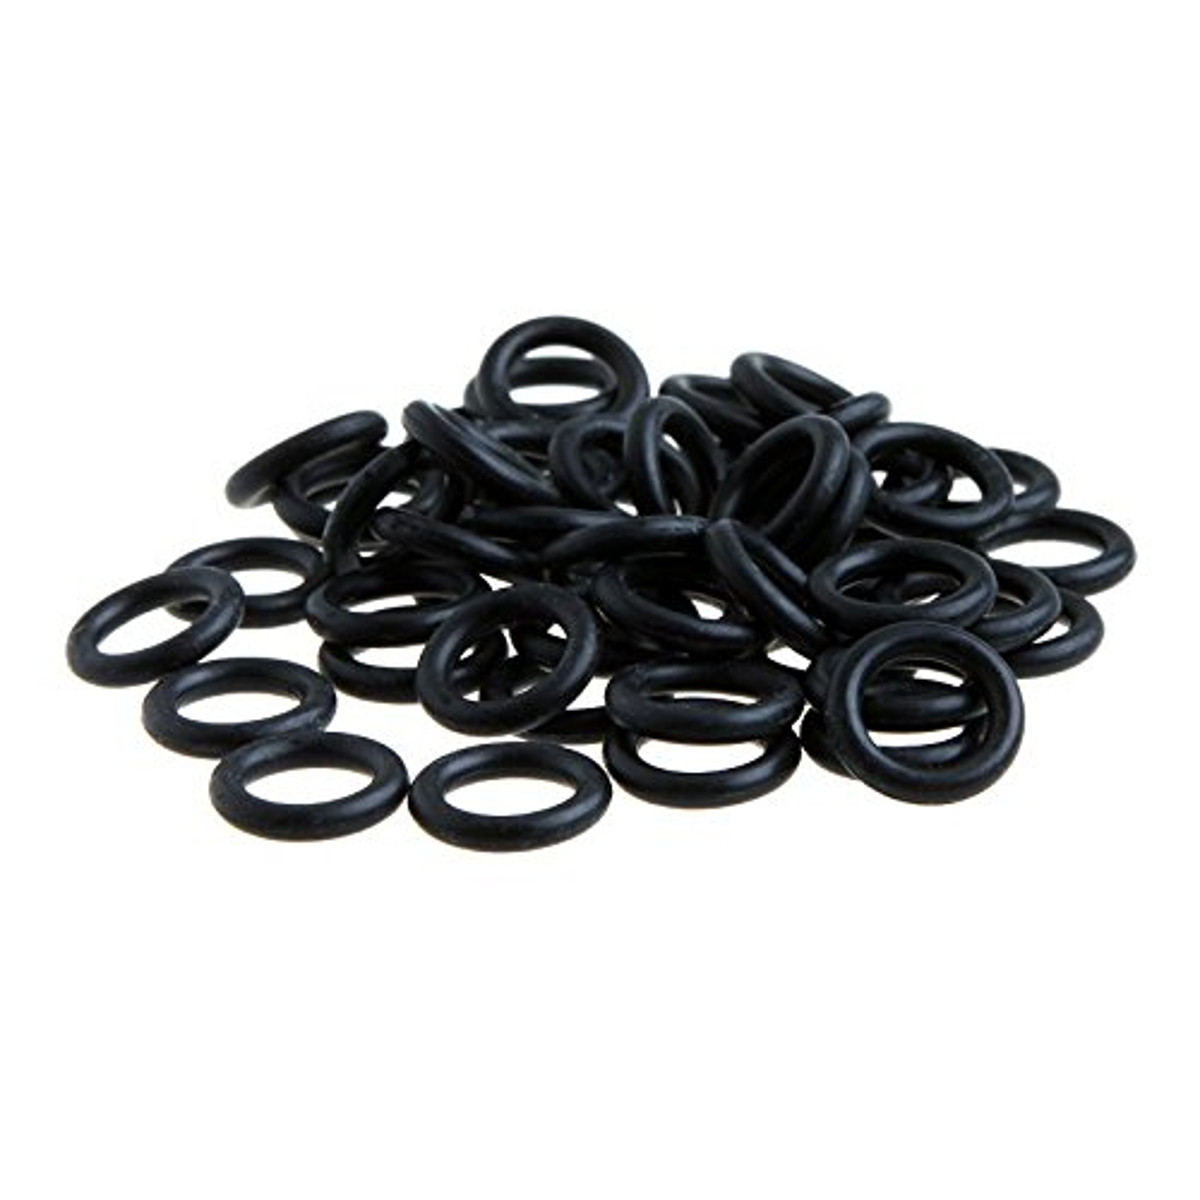 100 Mechanical Keyboard Keycap Rubber O-Ring Switch Dampeners for Cherry MX 45